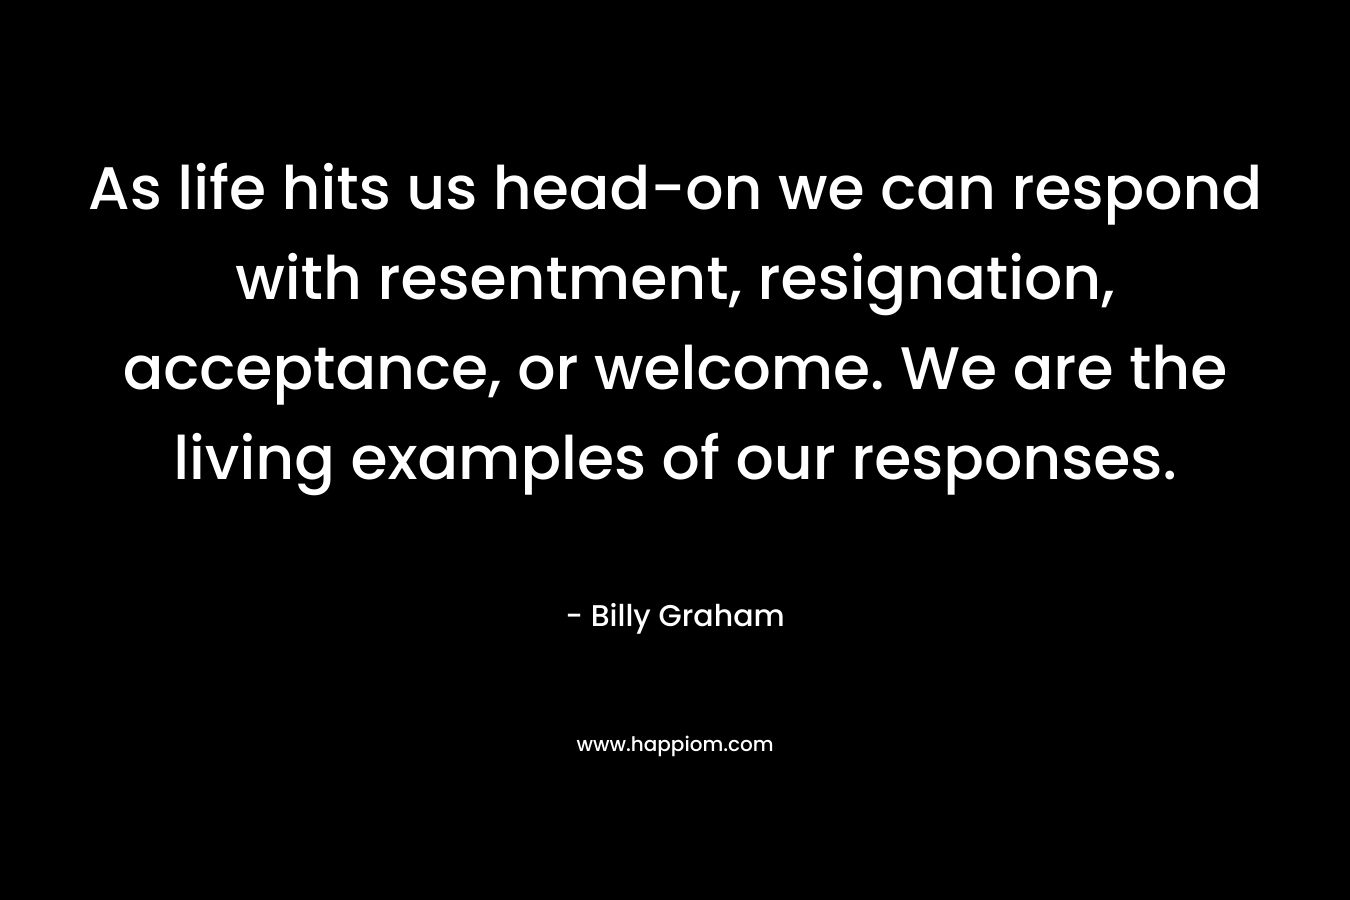 As life hits us head-on we can respond with resentment, resignation, acceptance, or welcome. We are the living examples of our responses. – Billy Graham